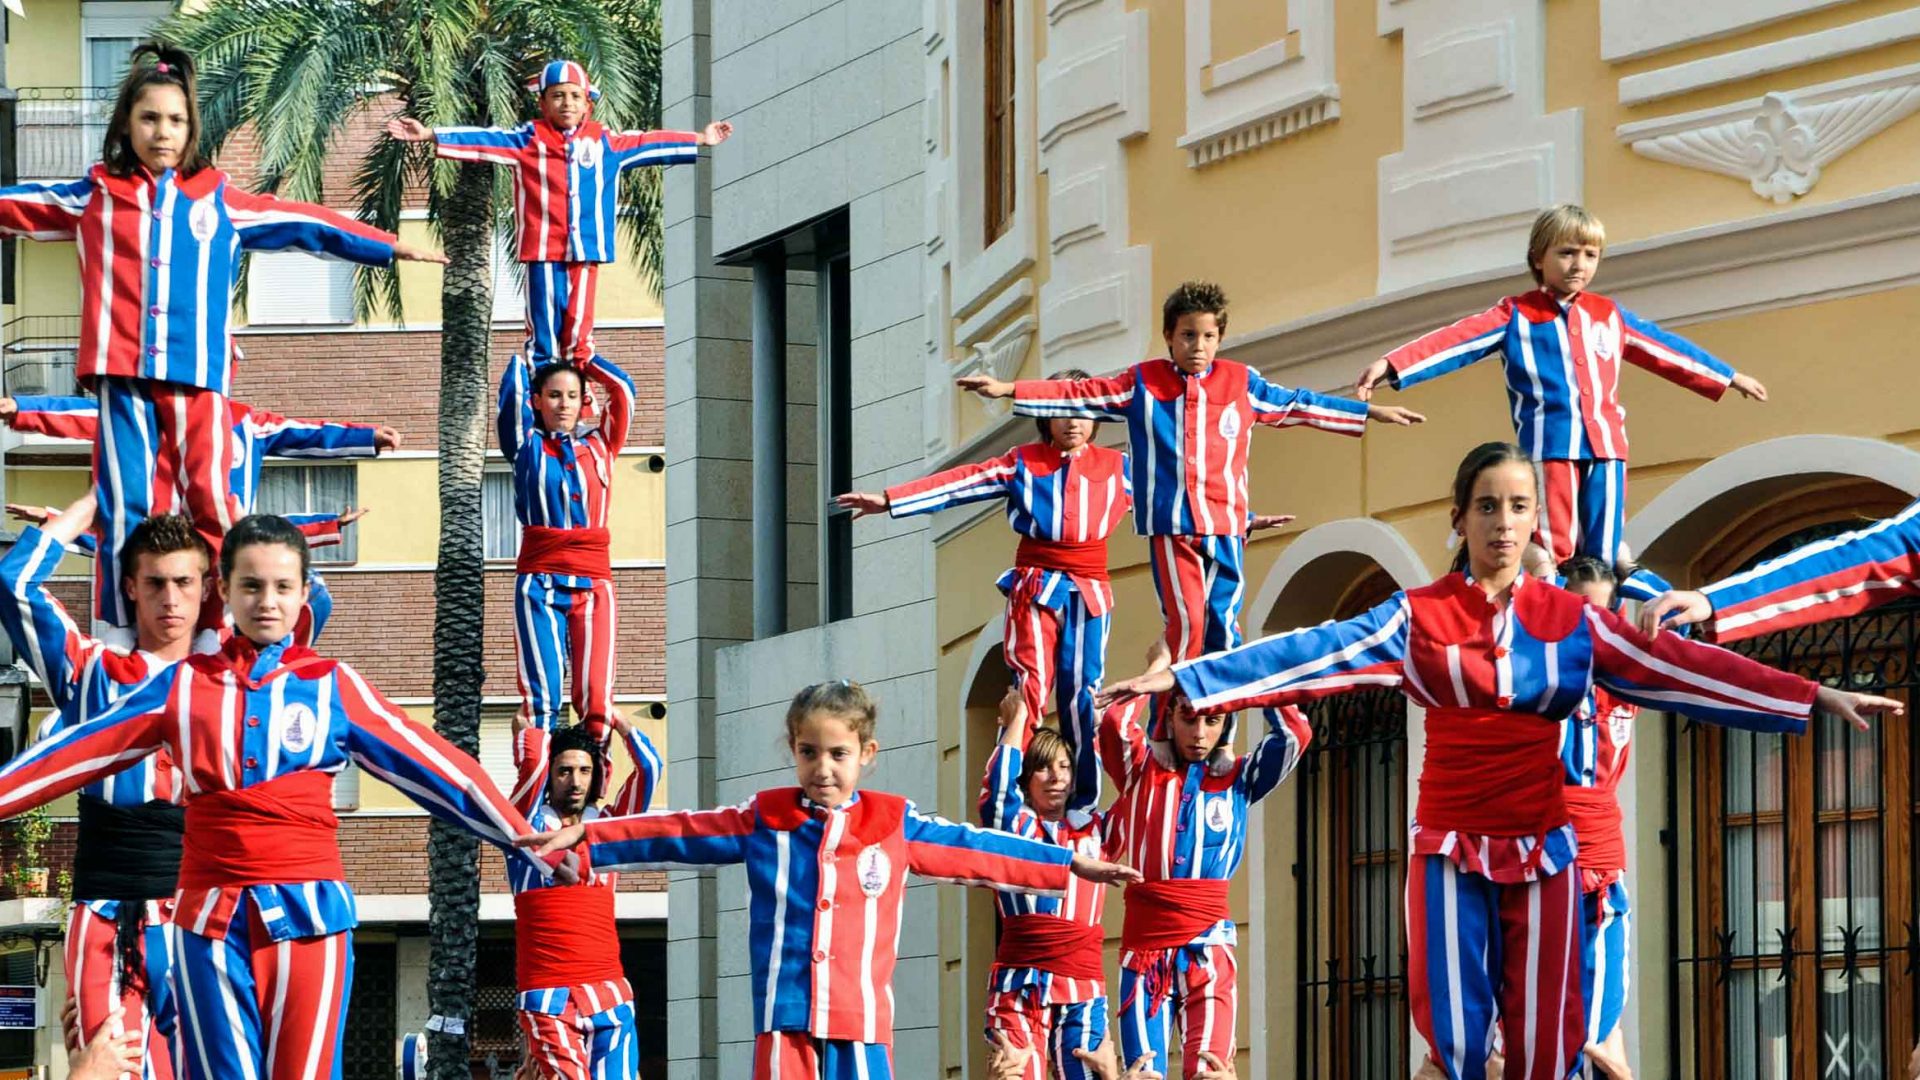 Young castellers in Catalonia.